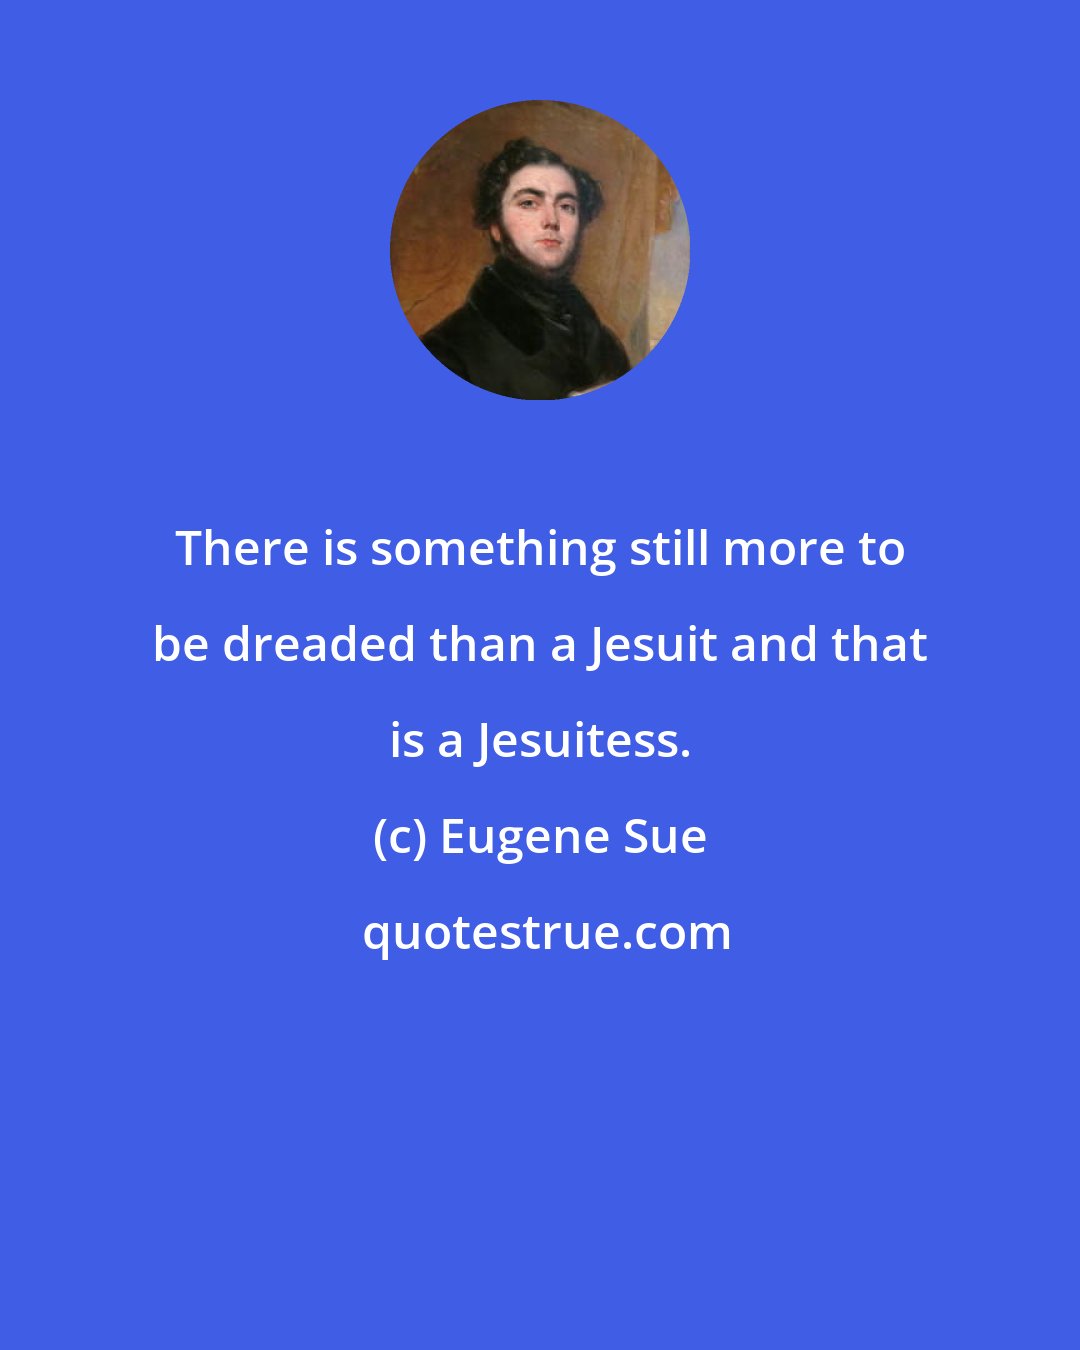 Eugene Sue: There is something still more to be dreaded than a Jesuit and that is a Jesuitess.